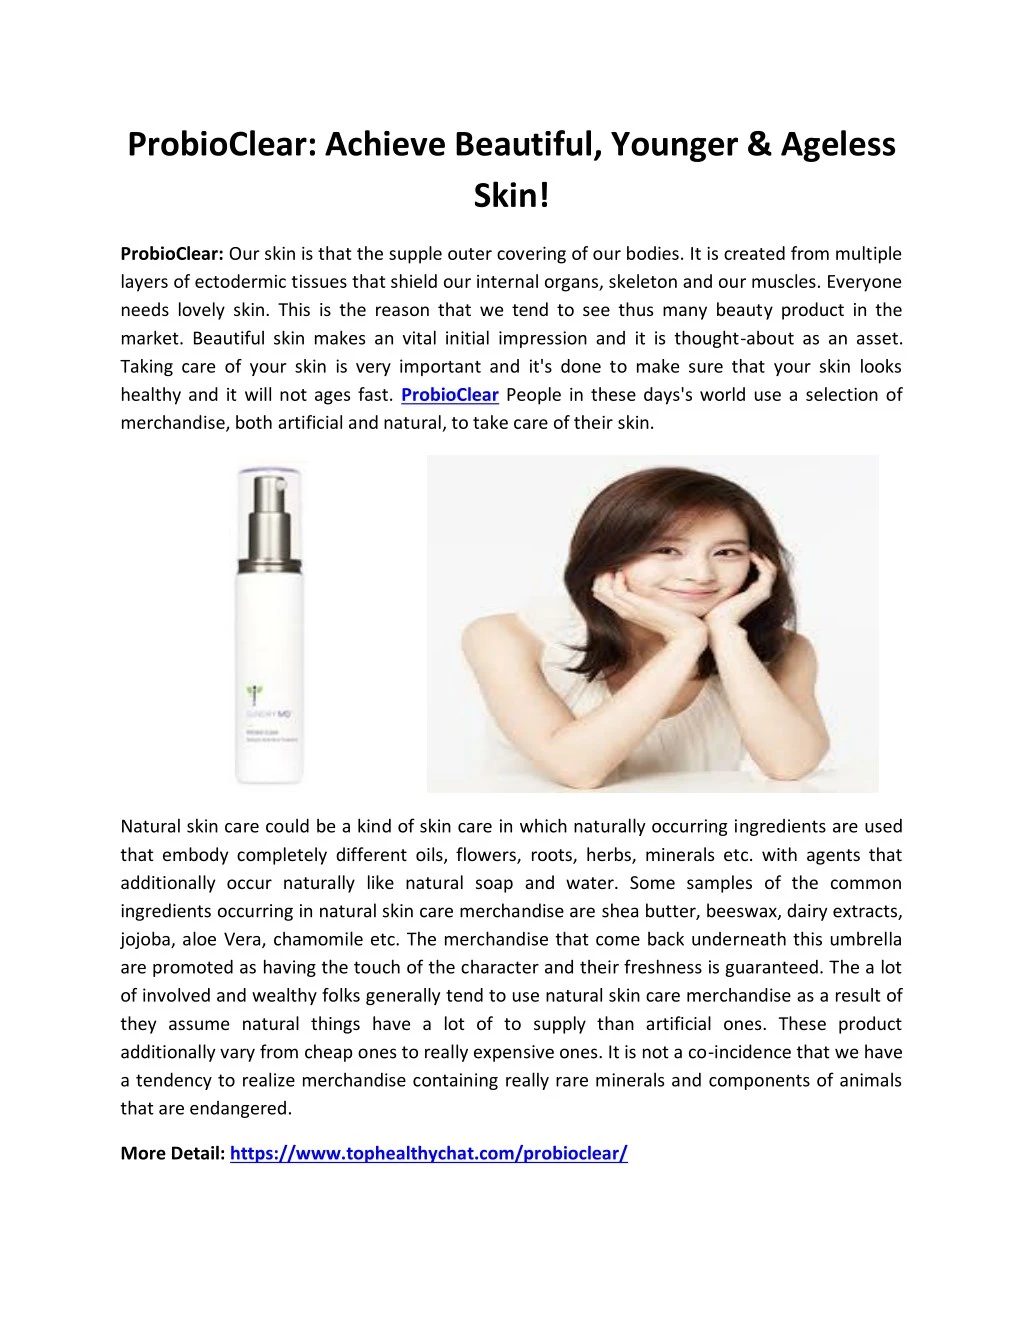 probioclear achieve beautiful younger ageless skin